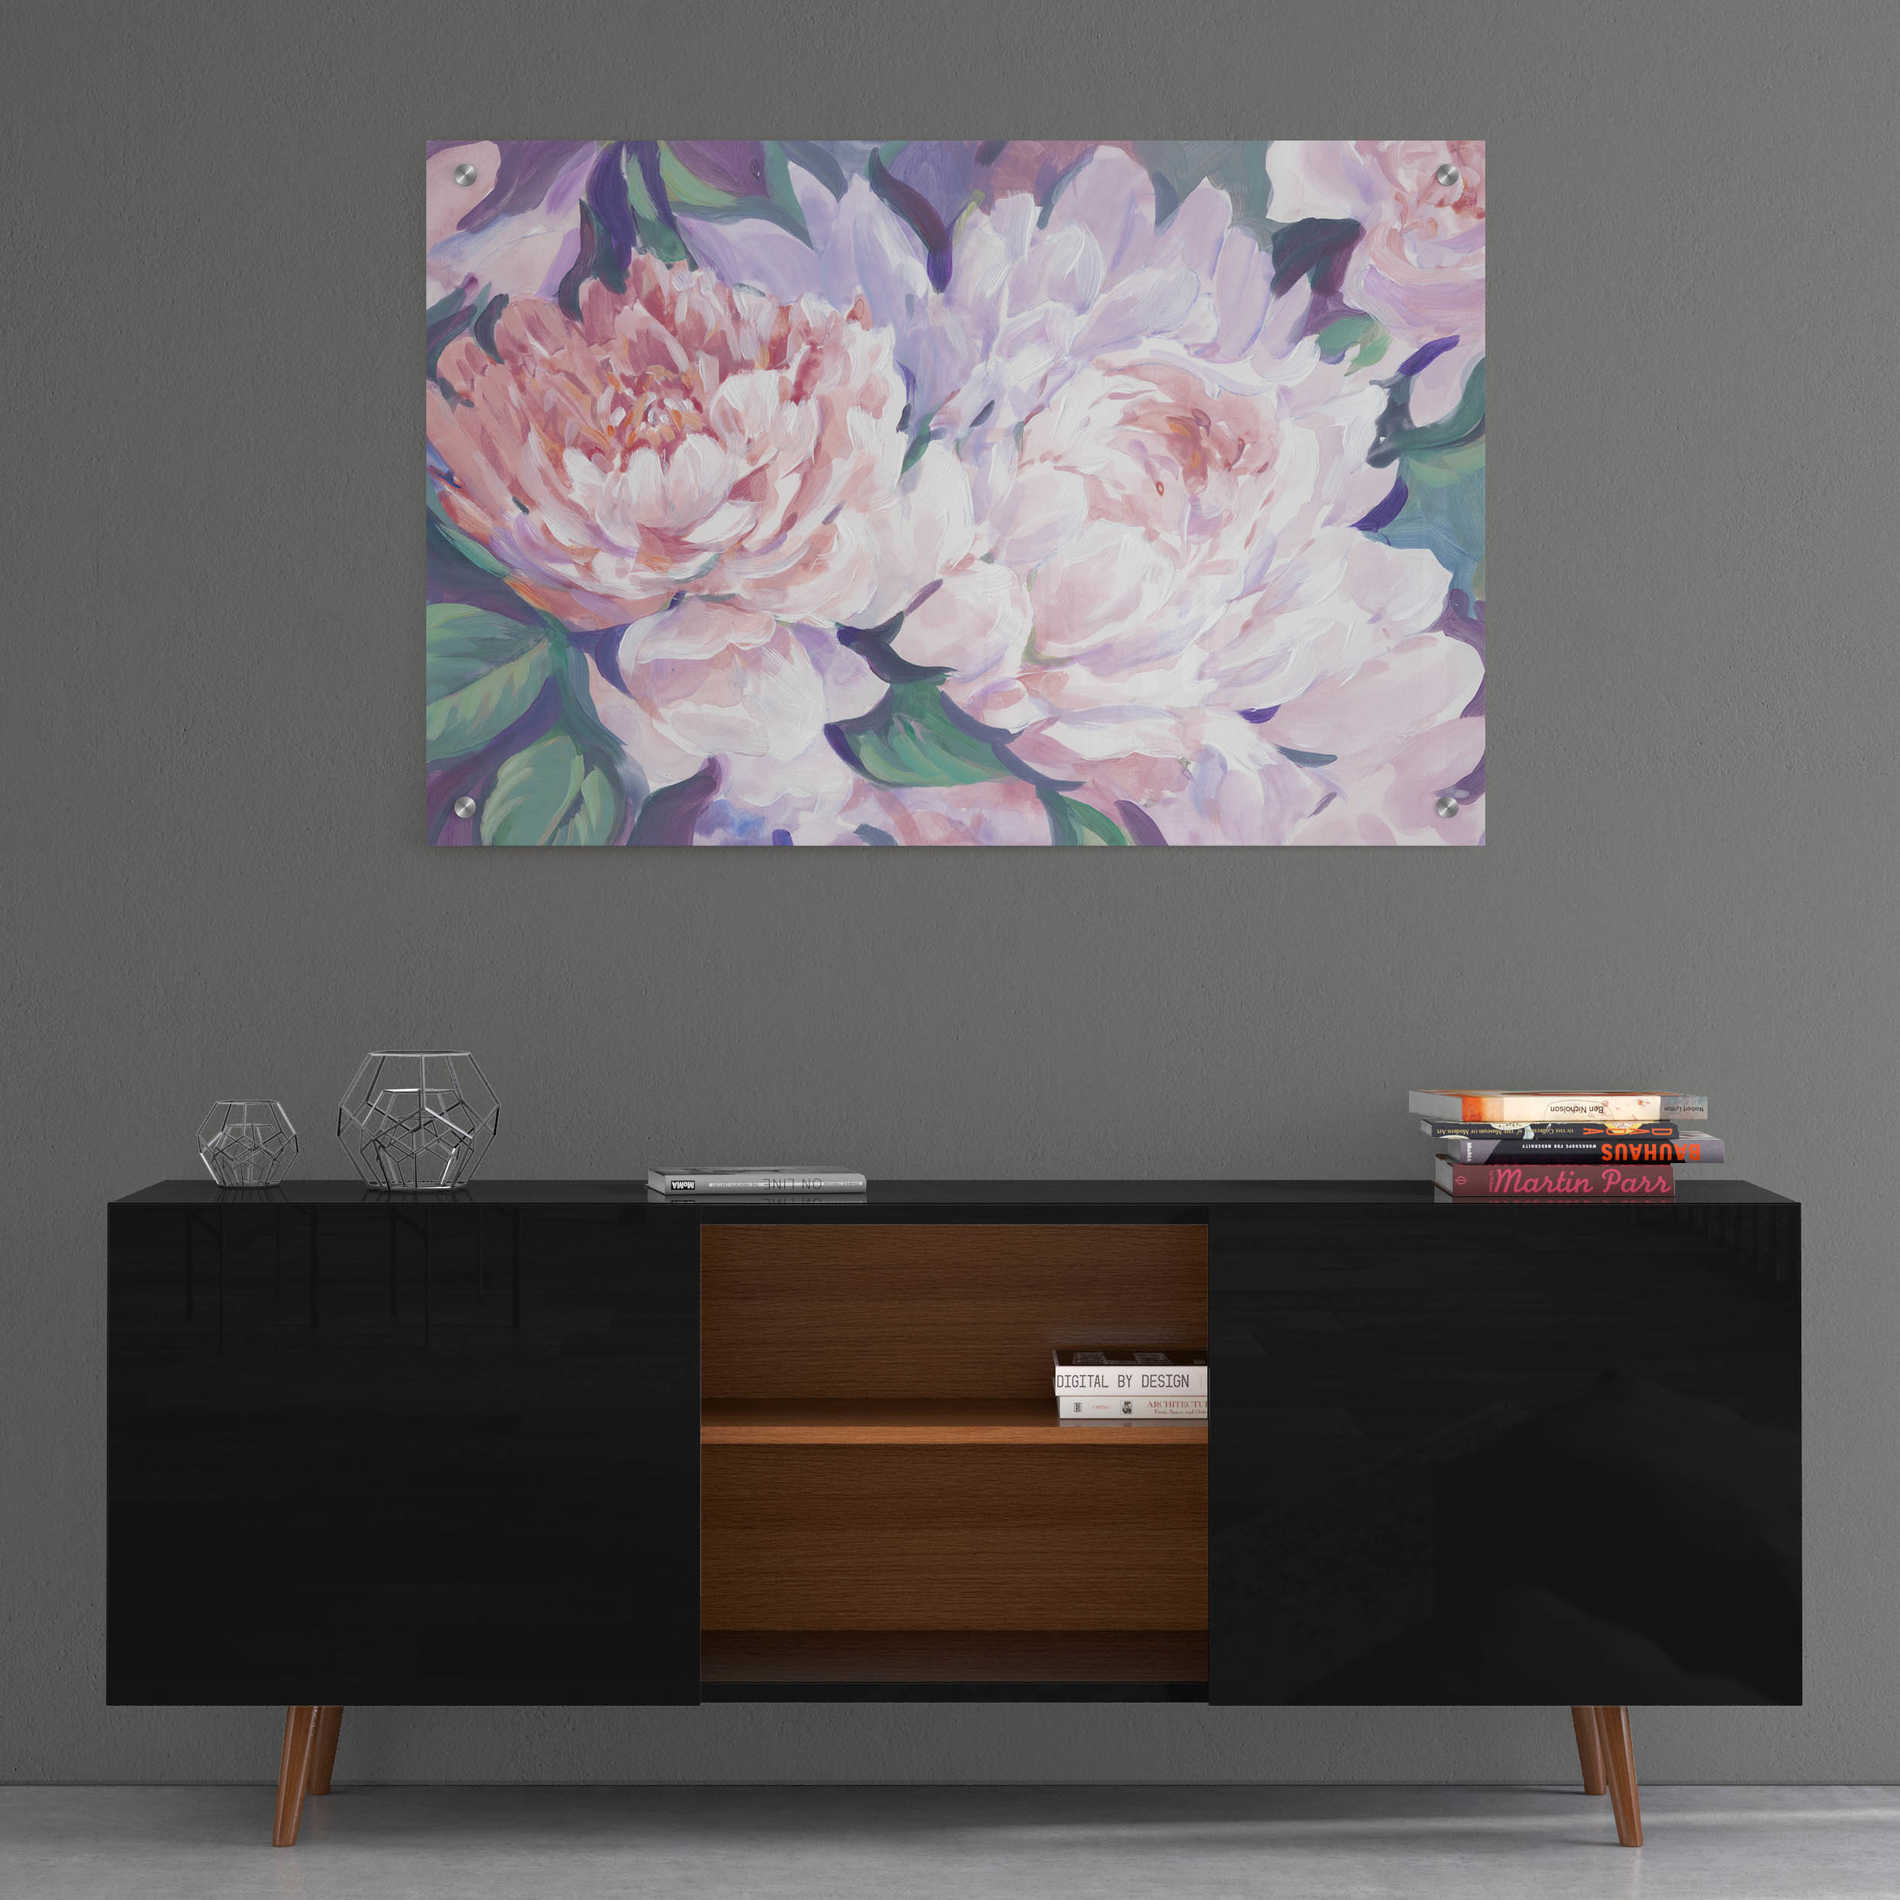 Epic Art 'Peonies in Bloom I' by Tim O'Toole, Acrylic Glass Wall Art,36x24